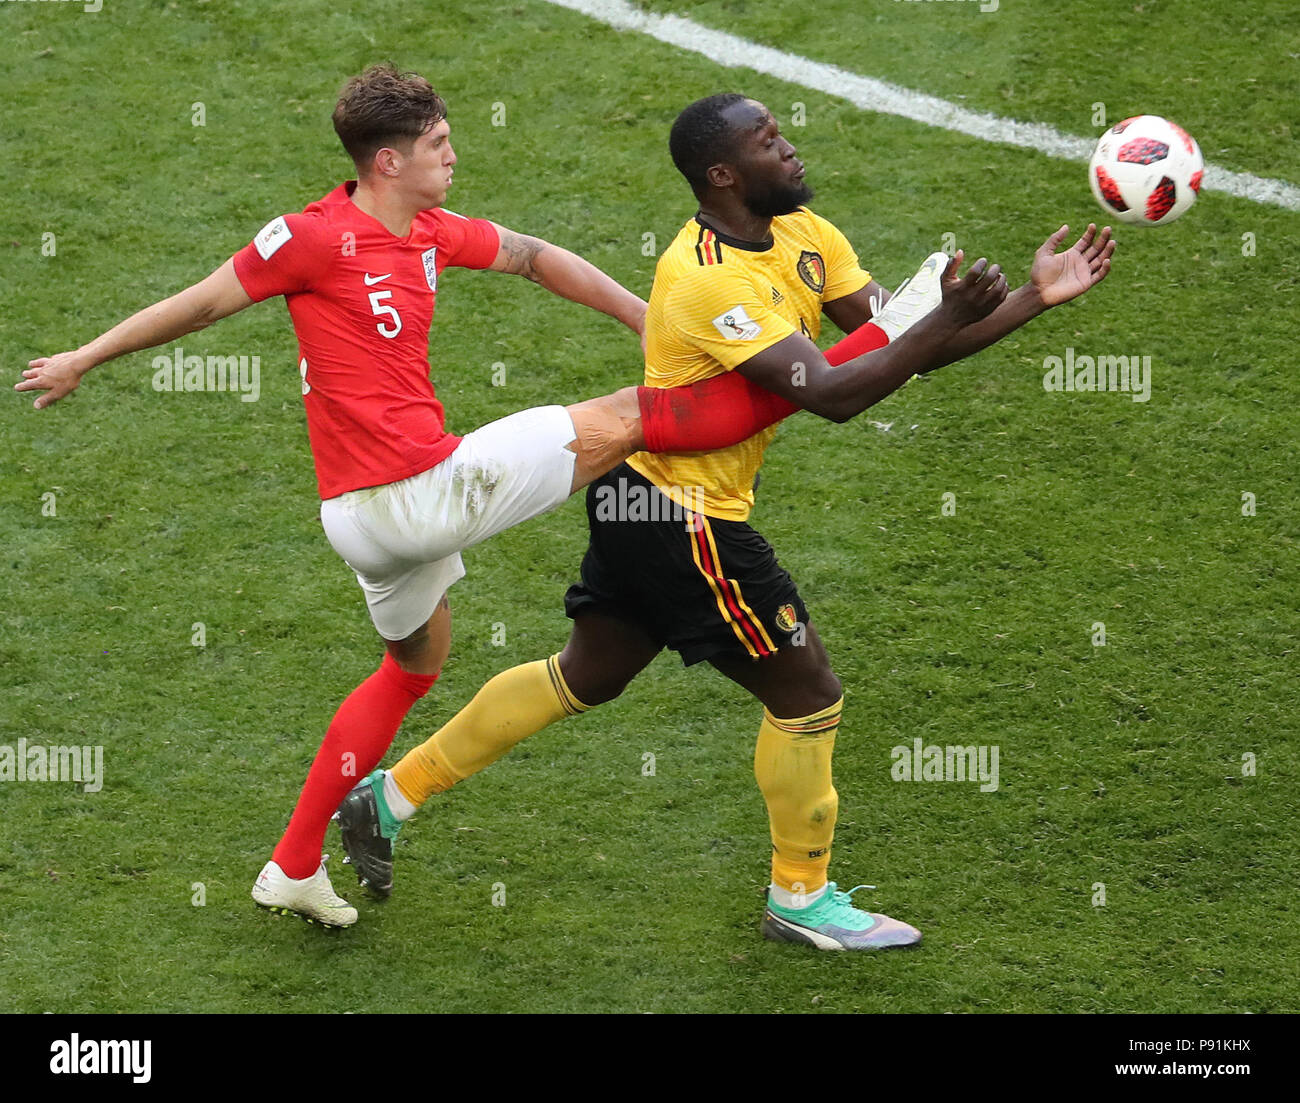 Saint Petersburg, Russia. 14th July, 2018. John Stones (L) of England vies with Romelu Lukaku of Belgium during the 2018 FIFA World Cup third place play-off match between England and Belgium in Saint Petersburg, Russia, July 14, 2018. Credit: Li Ming/Xinhua/Alamy Live News  Stock Photo